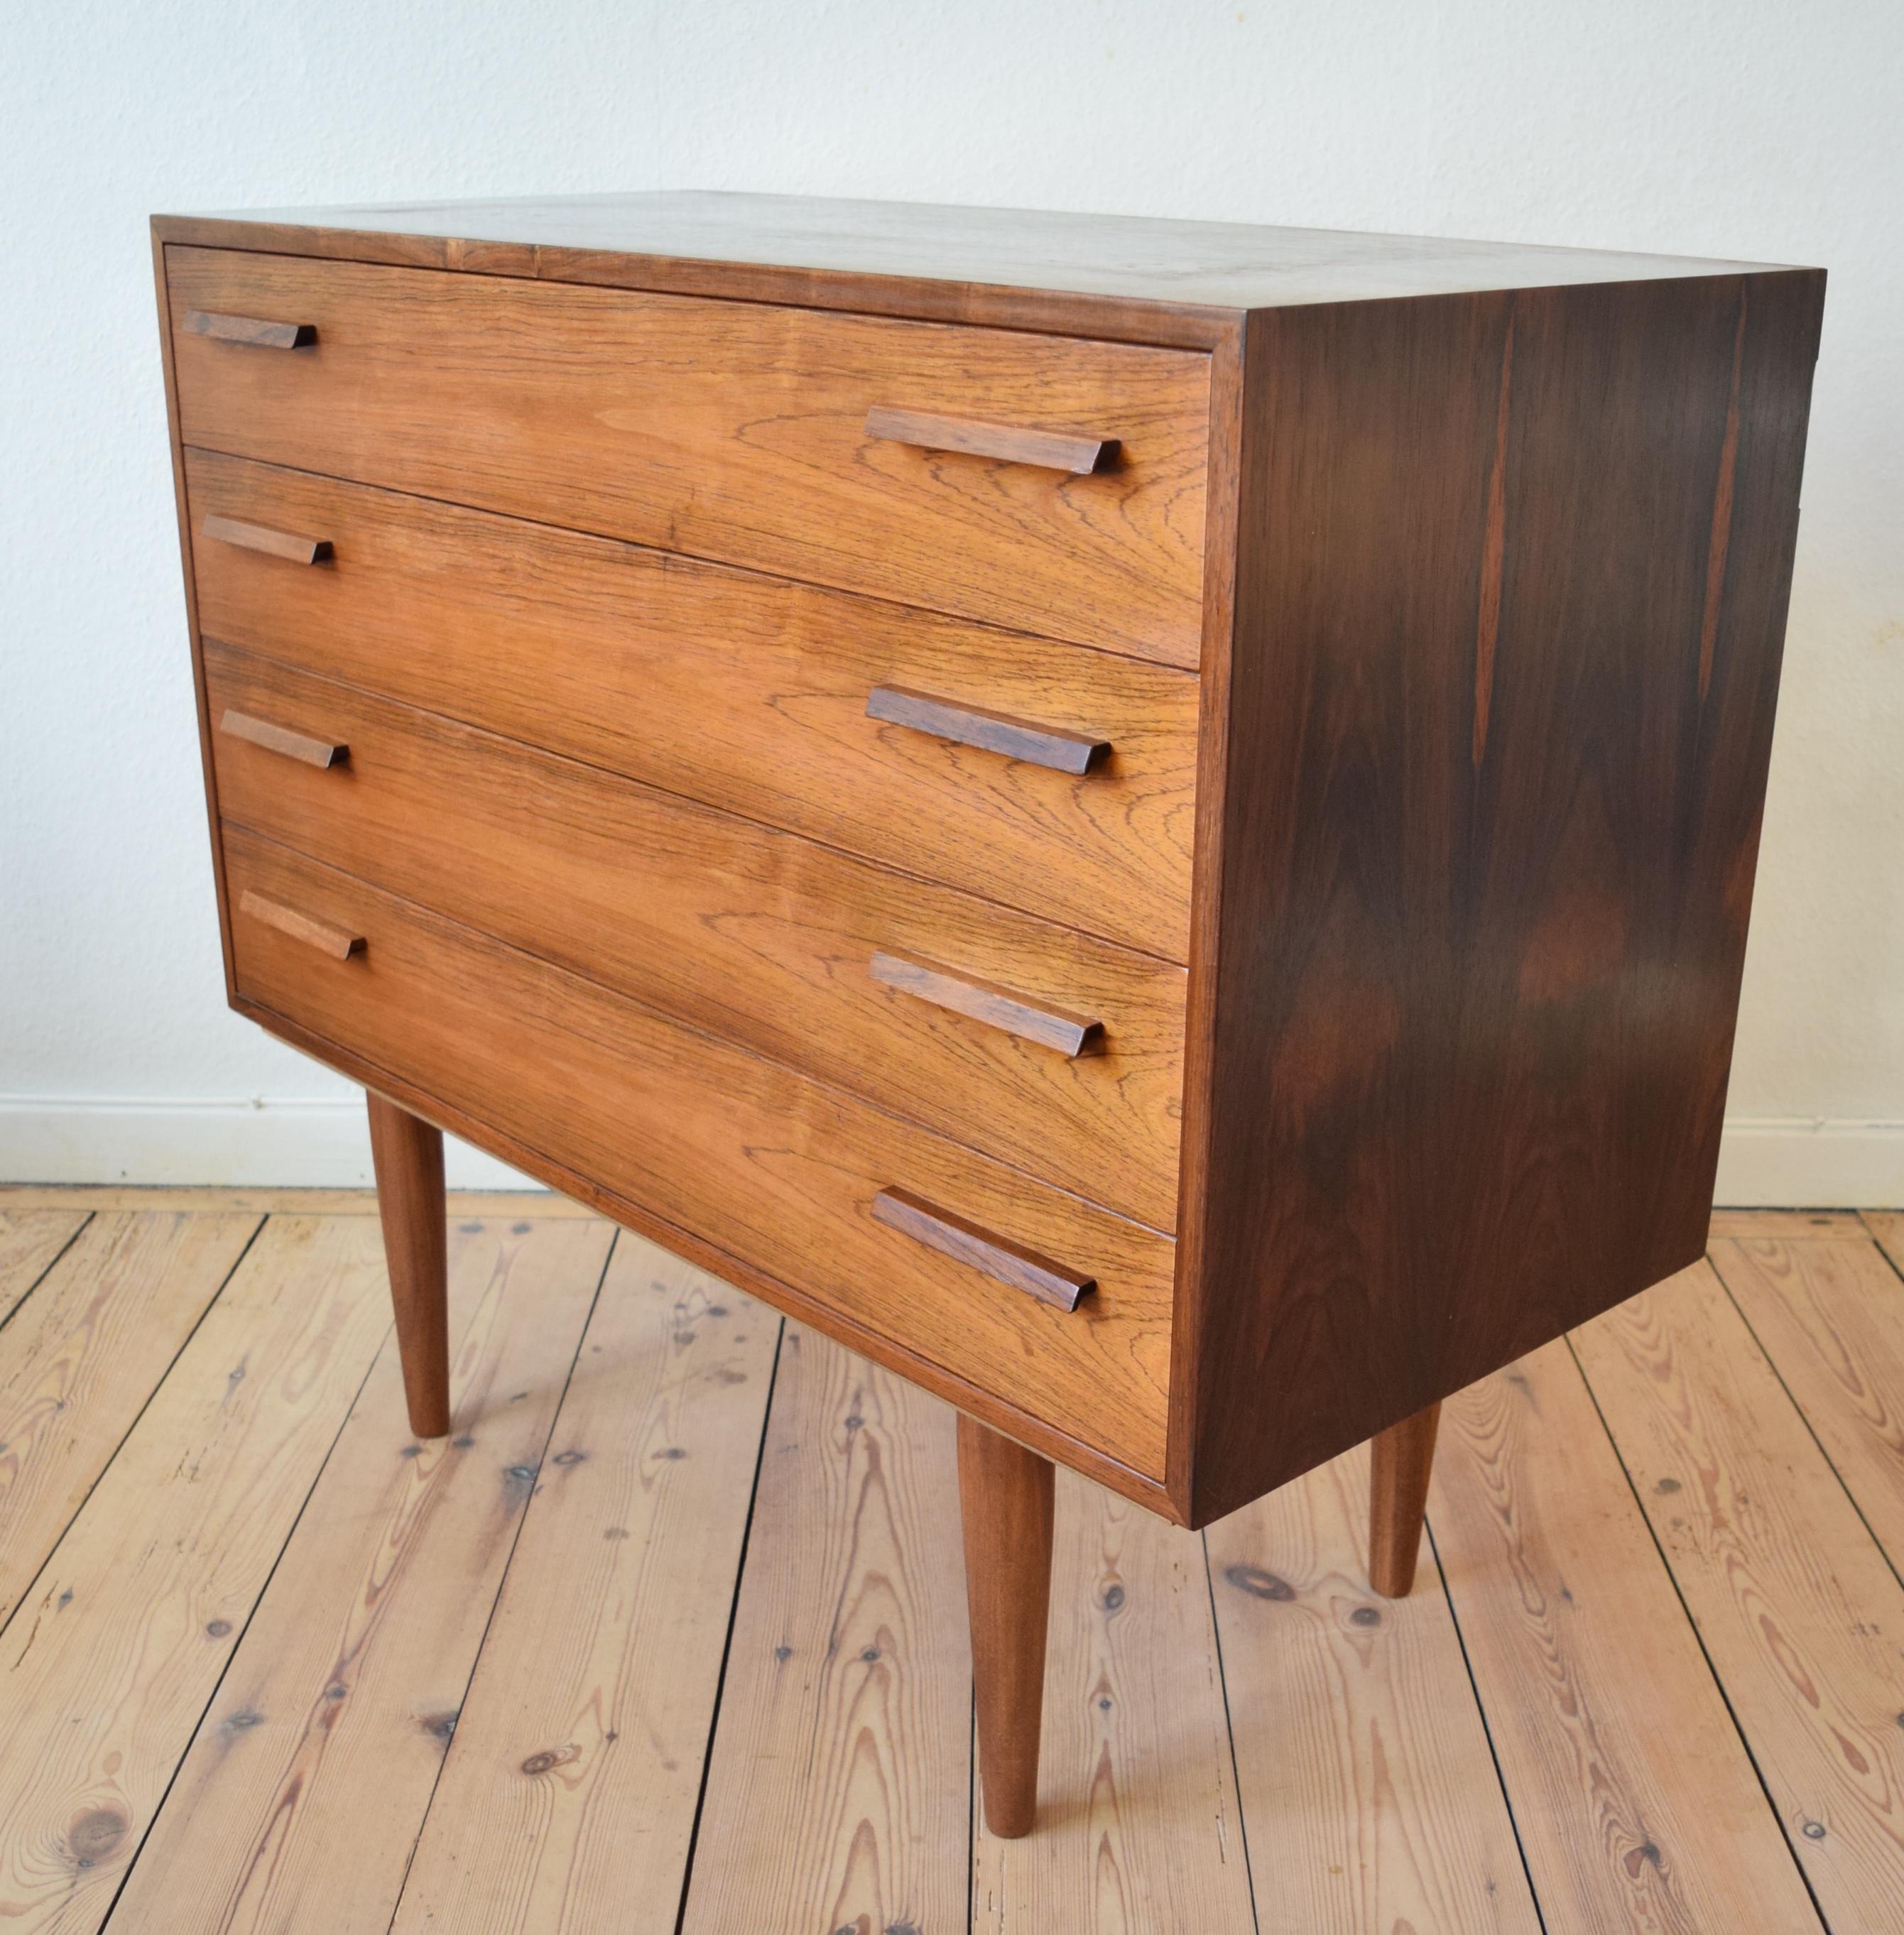 Danish rosewood chest of drawers by Kai Kristiansen for FM Møbler. Manufactured in the 1960s, this piece features four drawers with solid rosewood handles. Sits on turned and tapered legs. The unit is in a very good condition and apart from some age